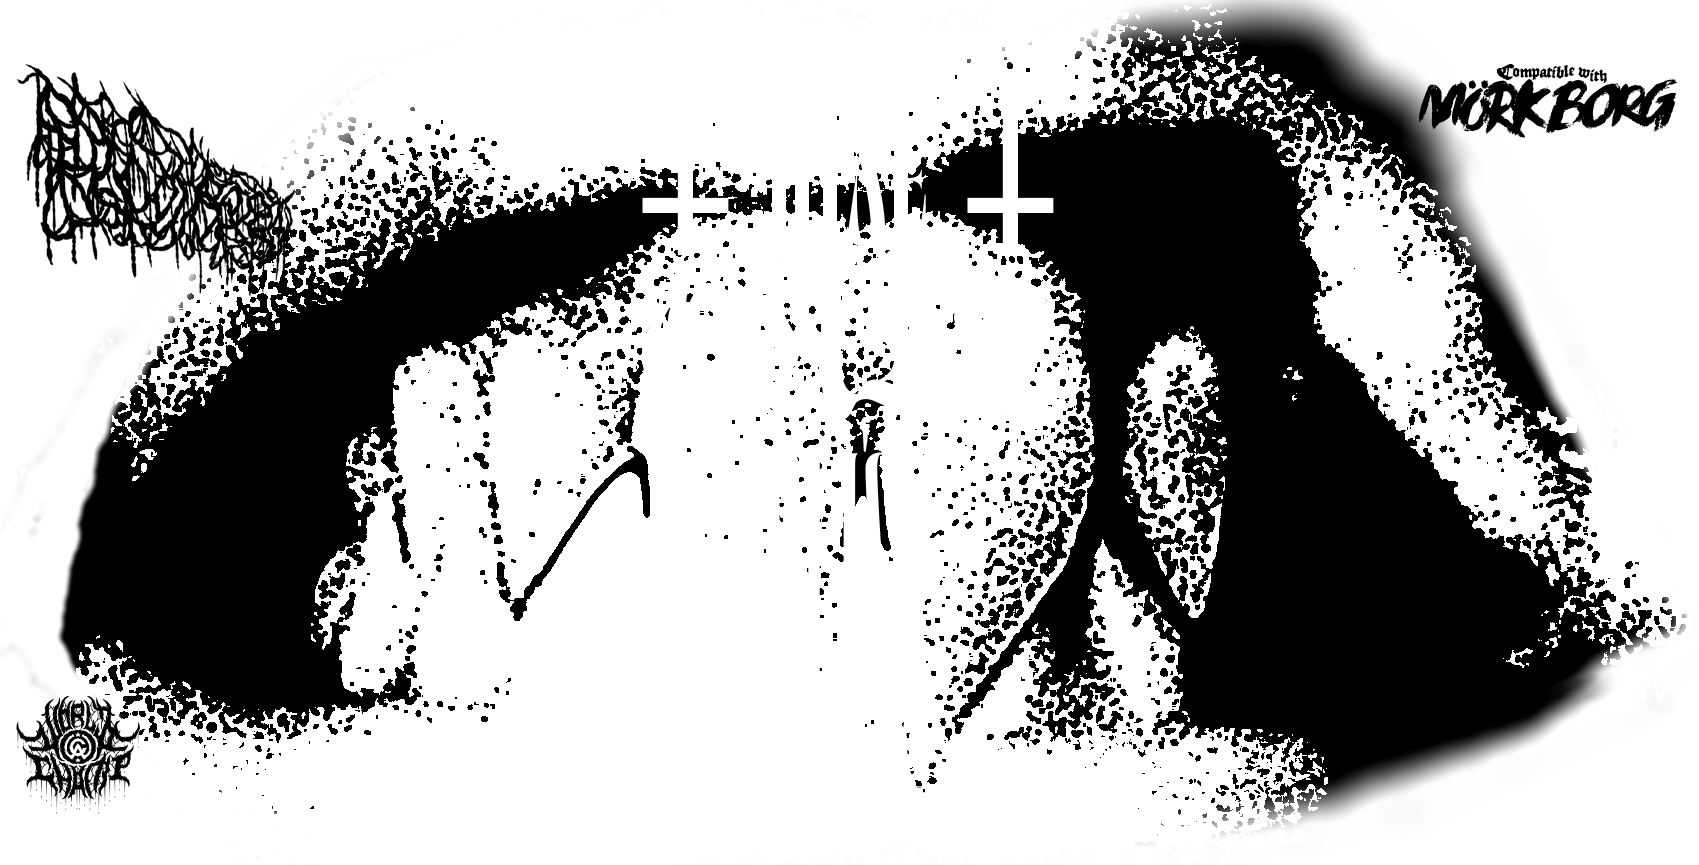 Rise of the Cult of Bliss